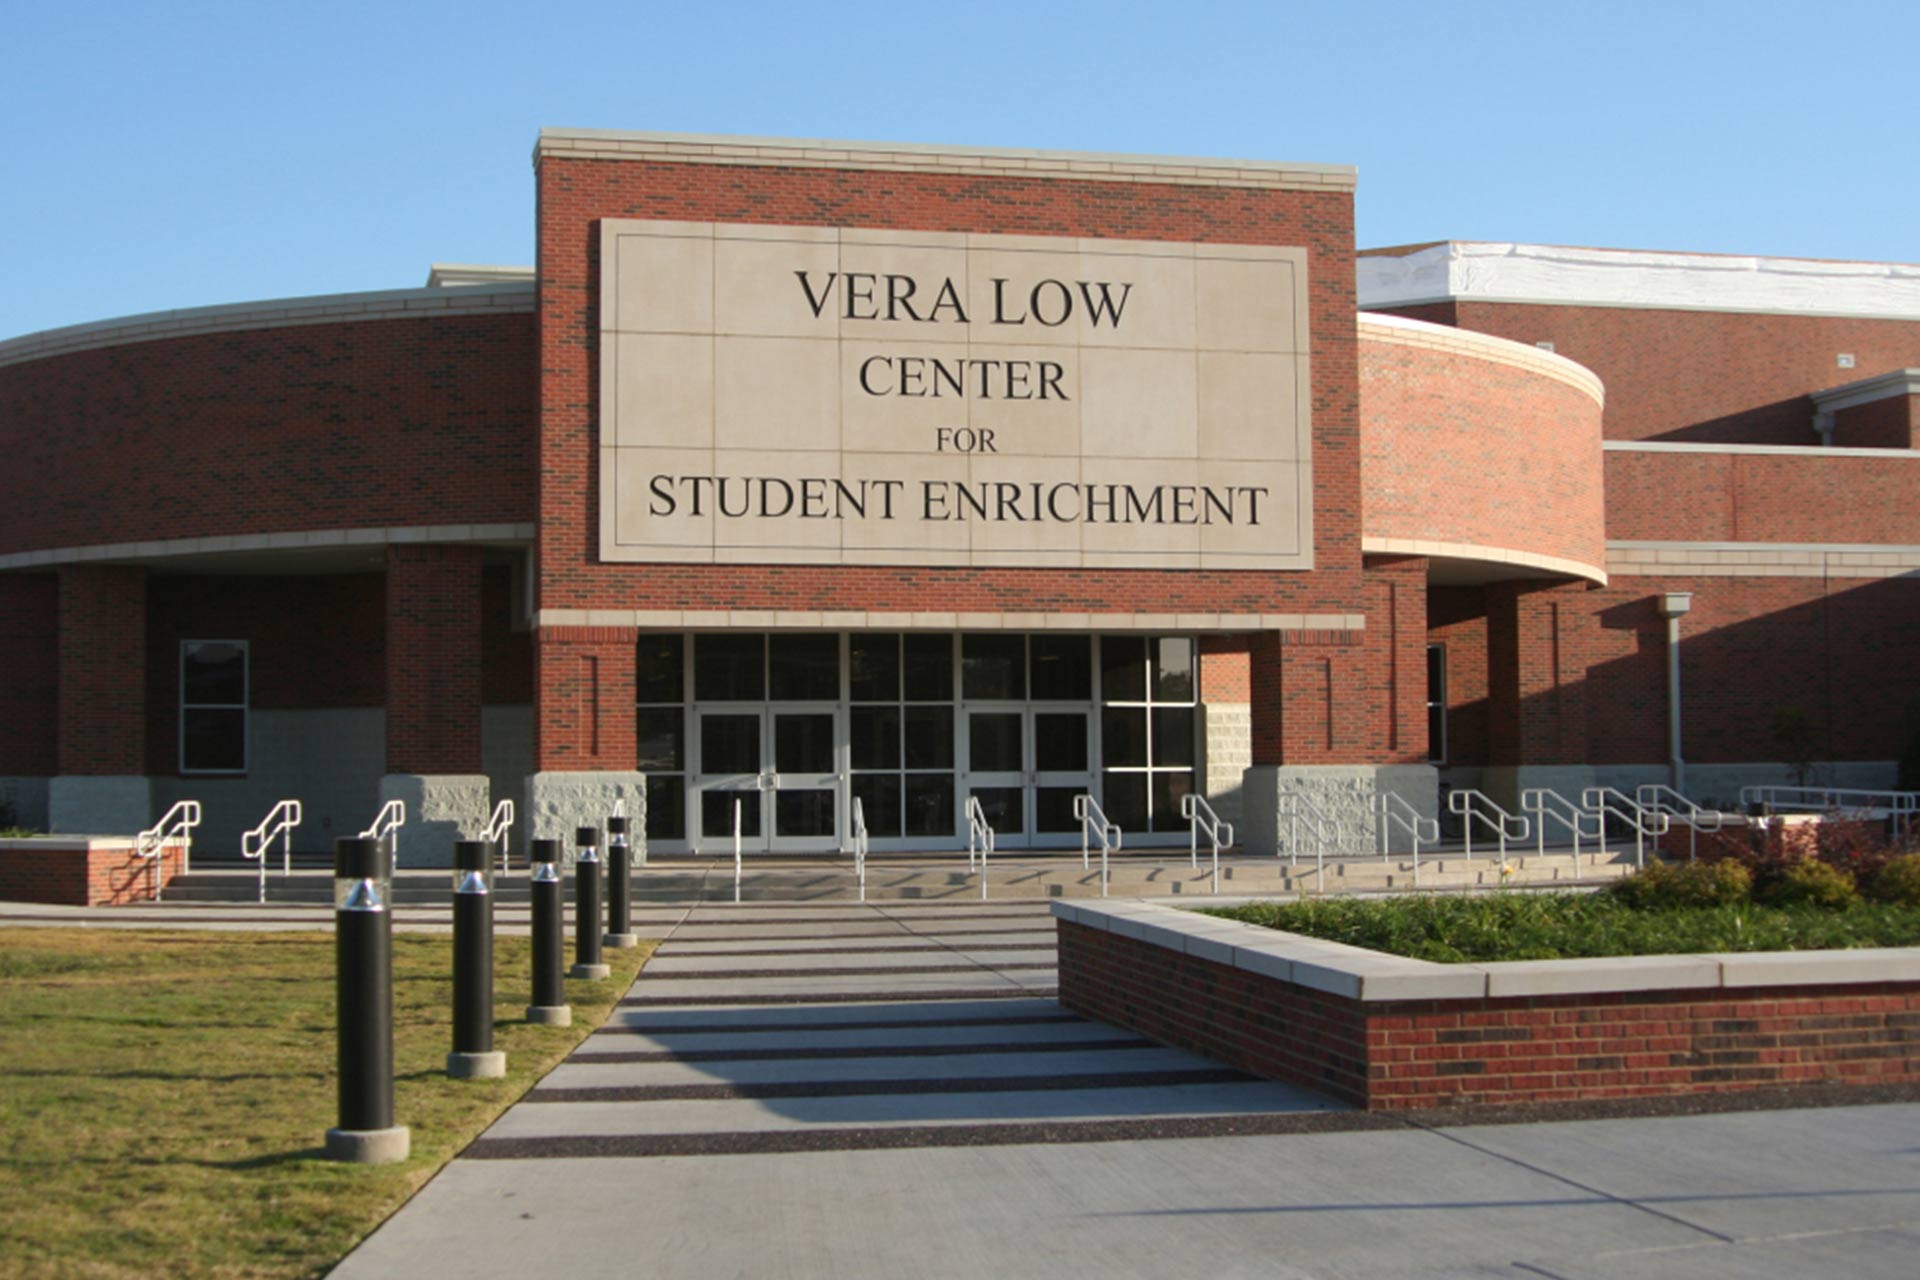 An outside view of the Vera Low Center for Student Enrichment at Bethel University in McKenzie, TN.